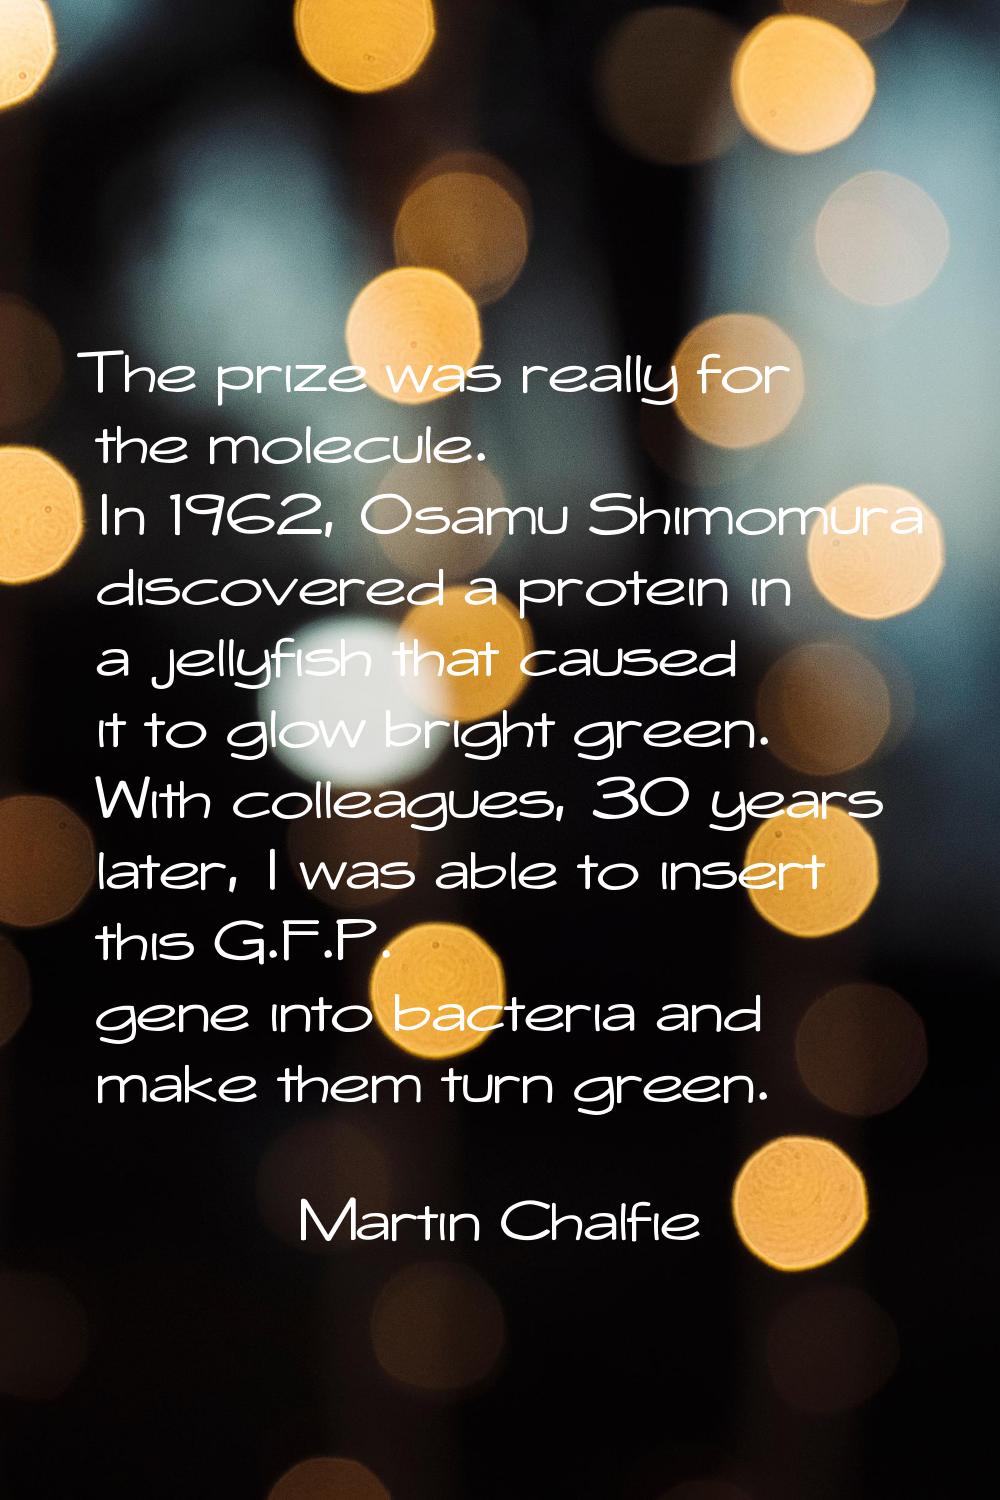 The prize was really for the molecule. In 1962, Osamu Shimomura discovered a protein in a jellyfish